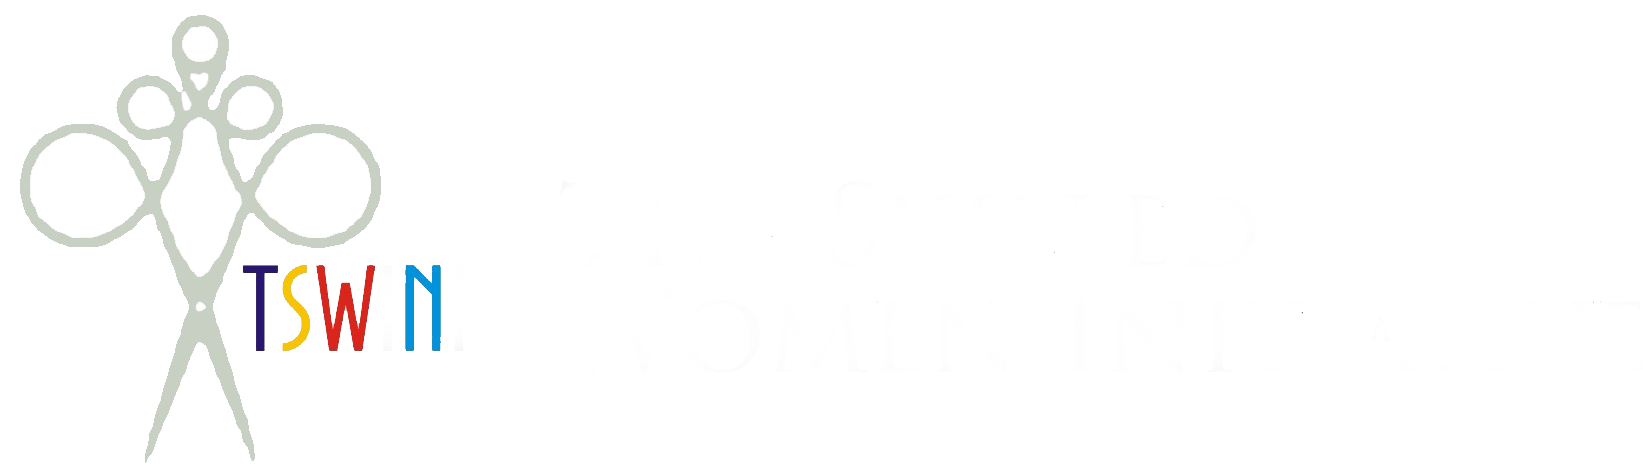 The Skilled Woman Initiative